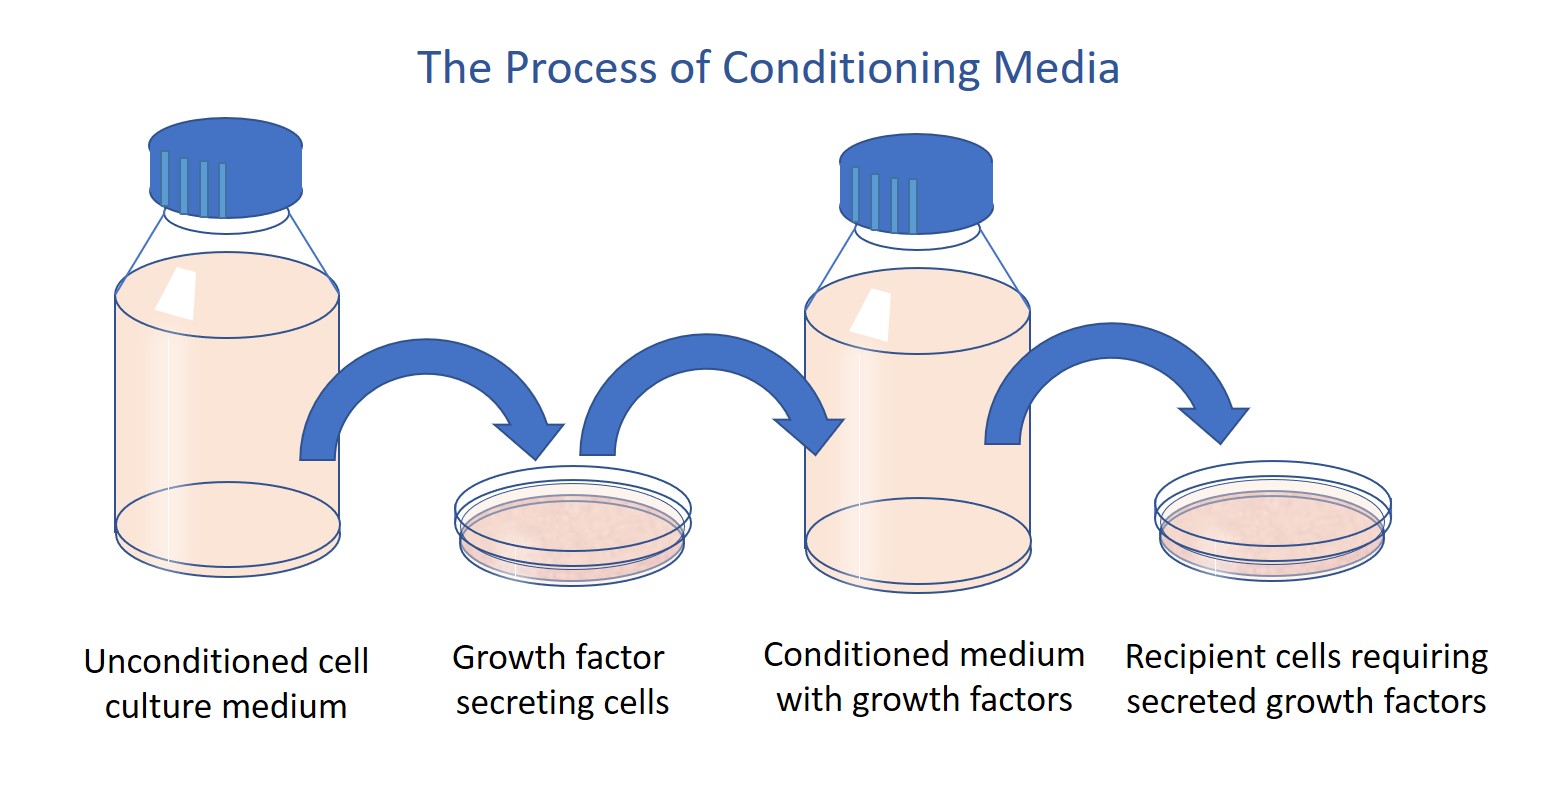 Conditioning cell culture media